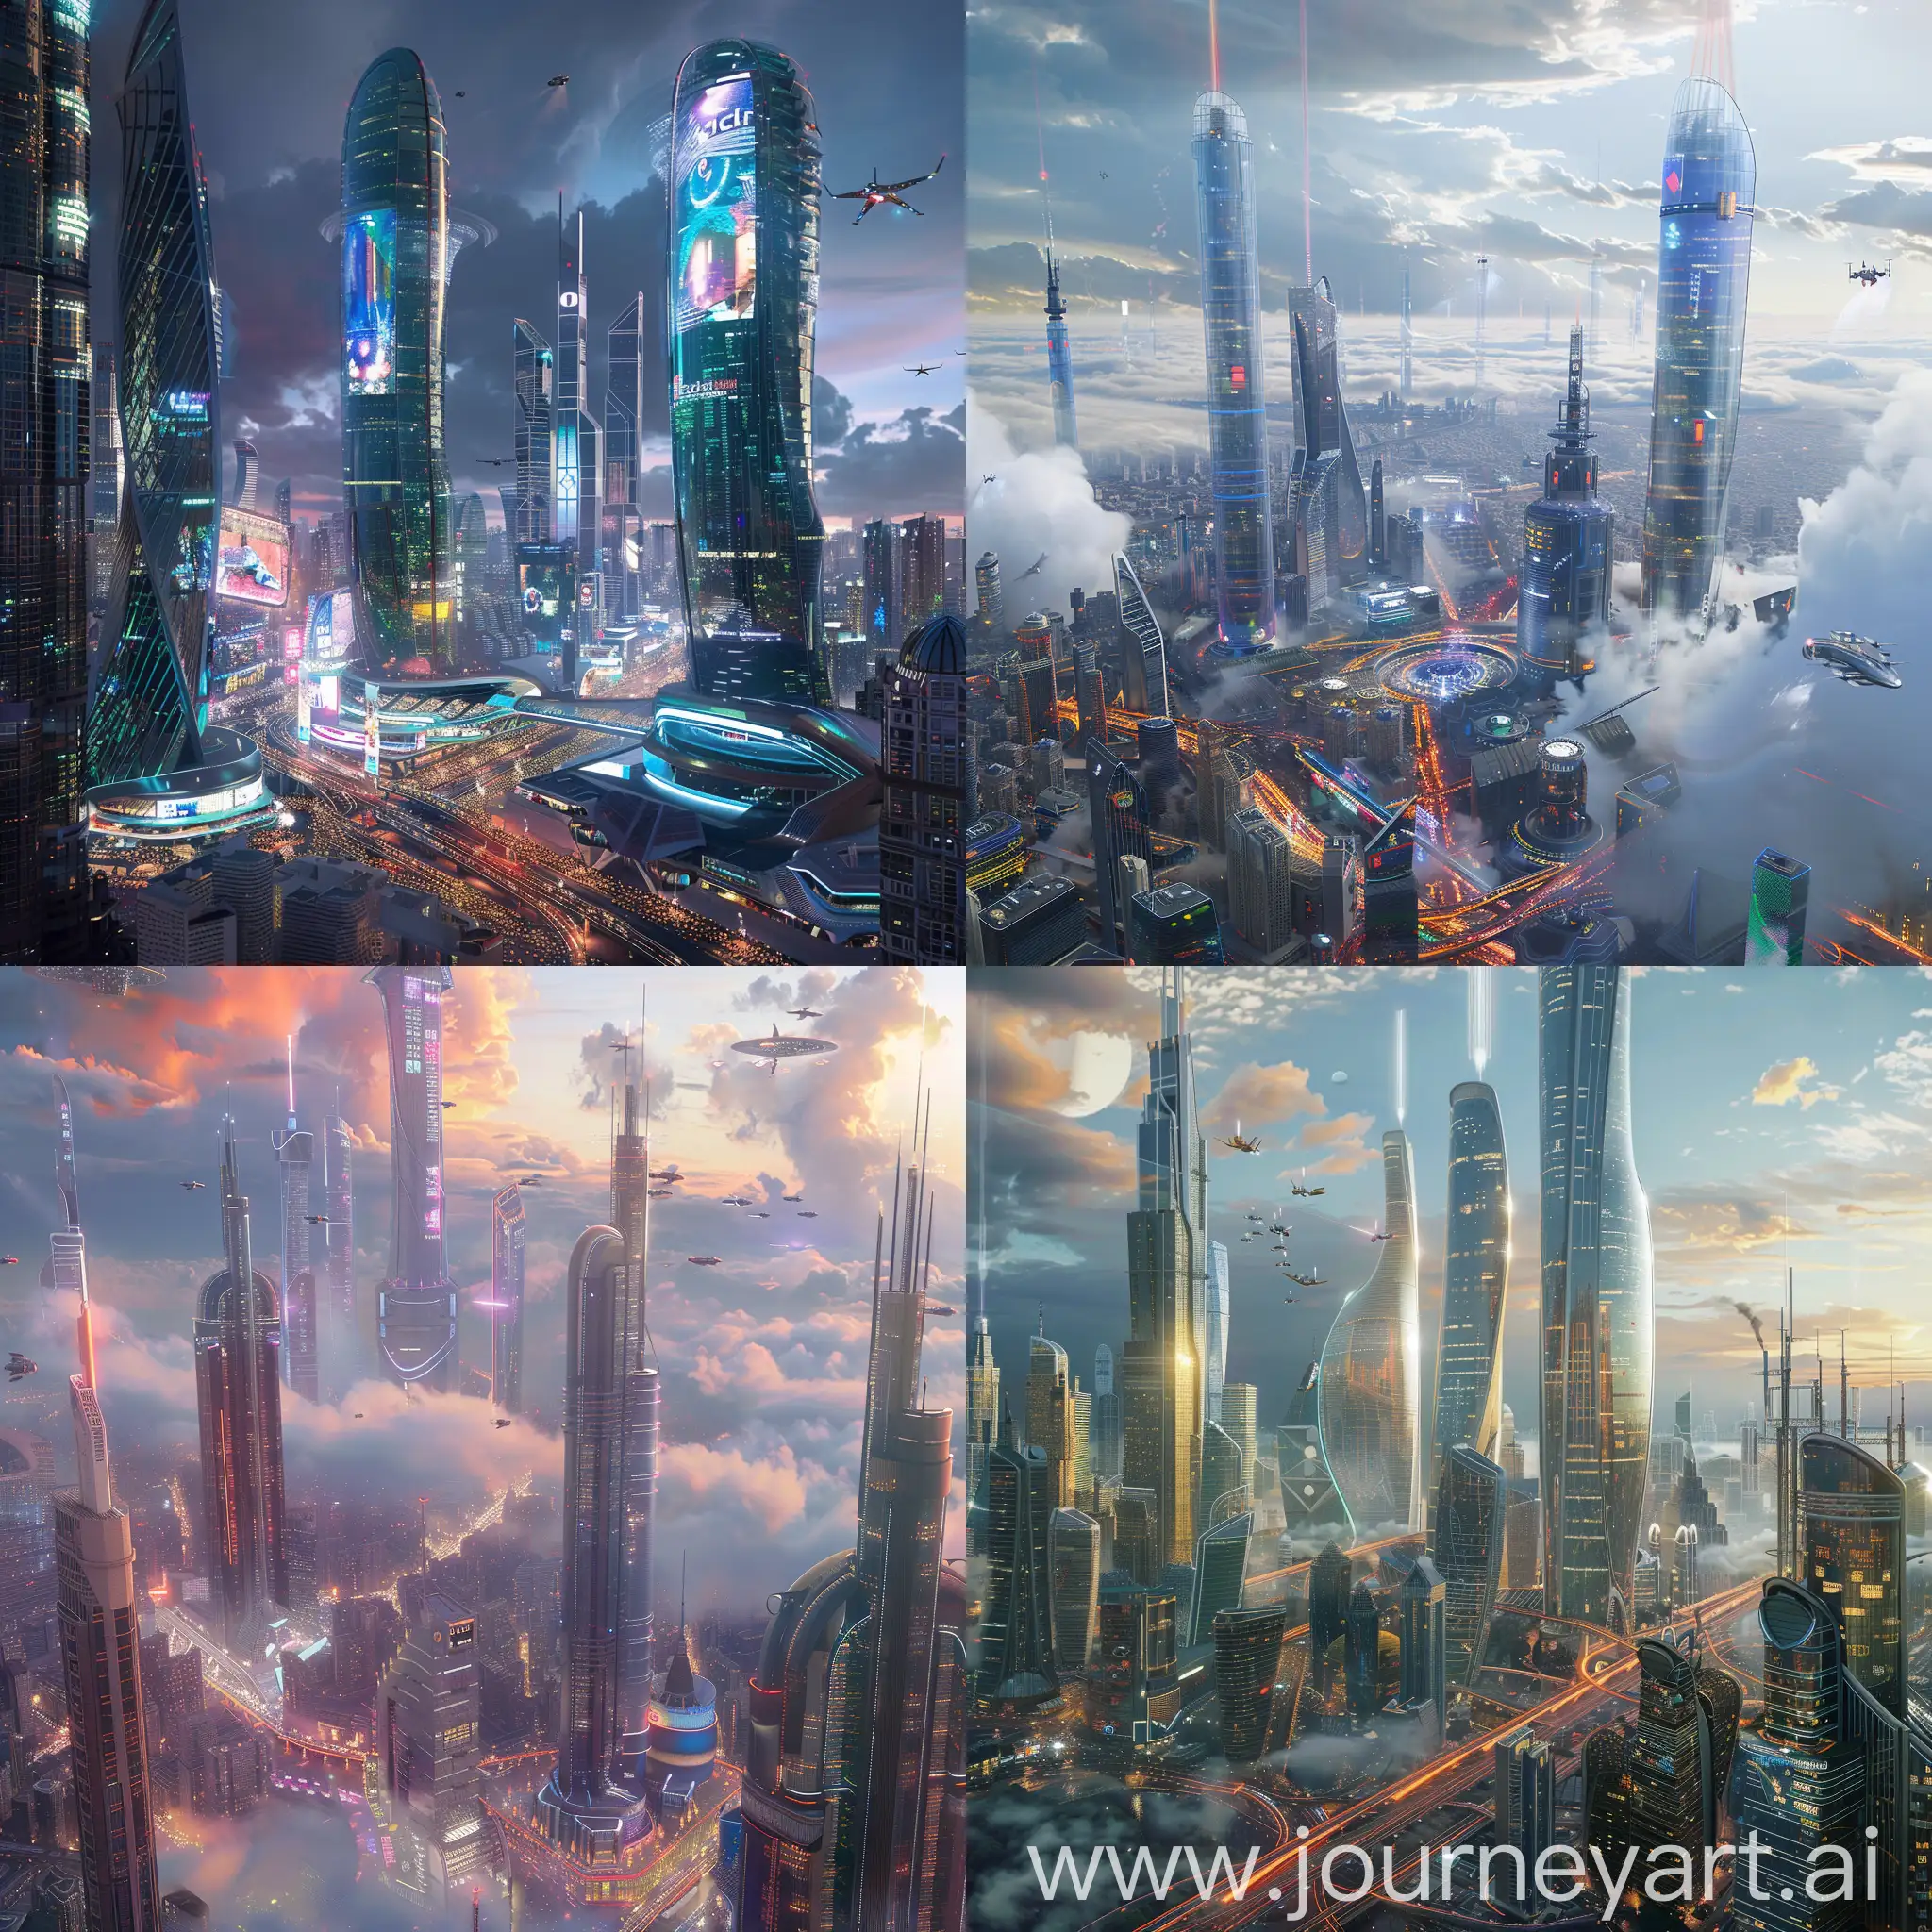 Futuristic-Moscow-Cityscape-with-Skyscrapers-Flying-Vehicles-and-Holographic-Displays